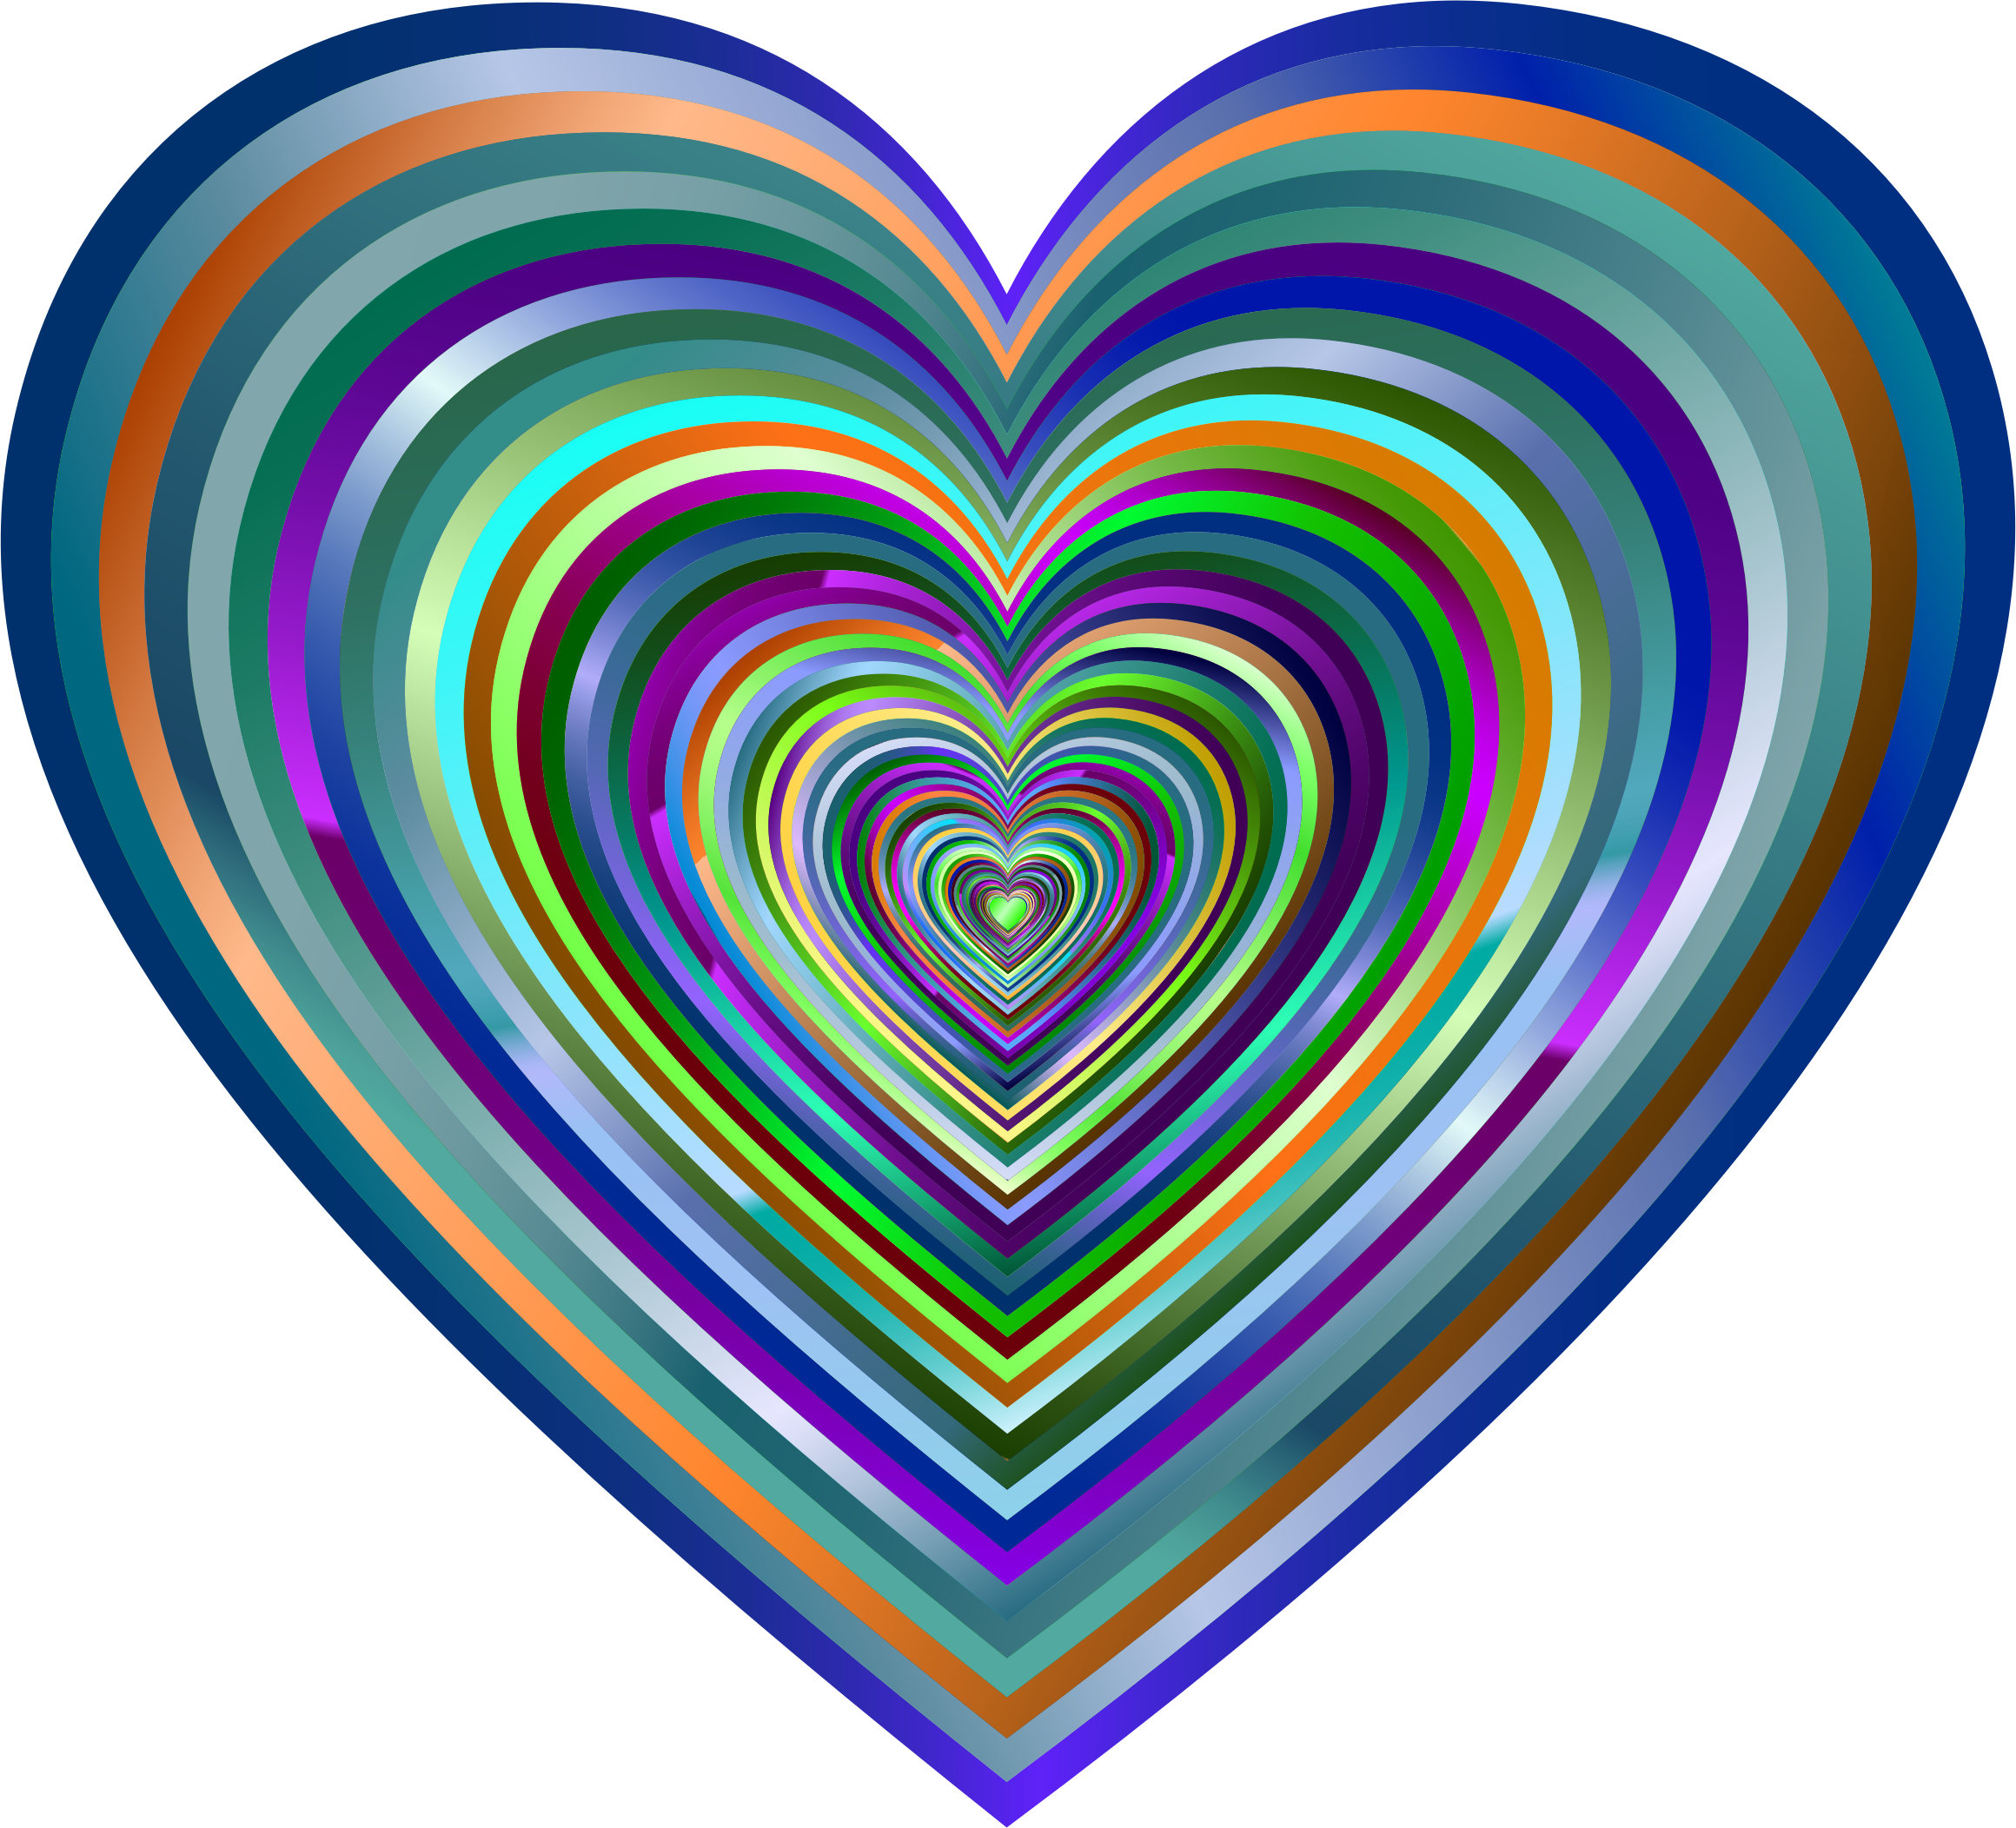 Hearts Tunnel 3 - Free Psychedelic Heart Clip Art (2320x2104)